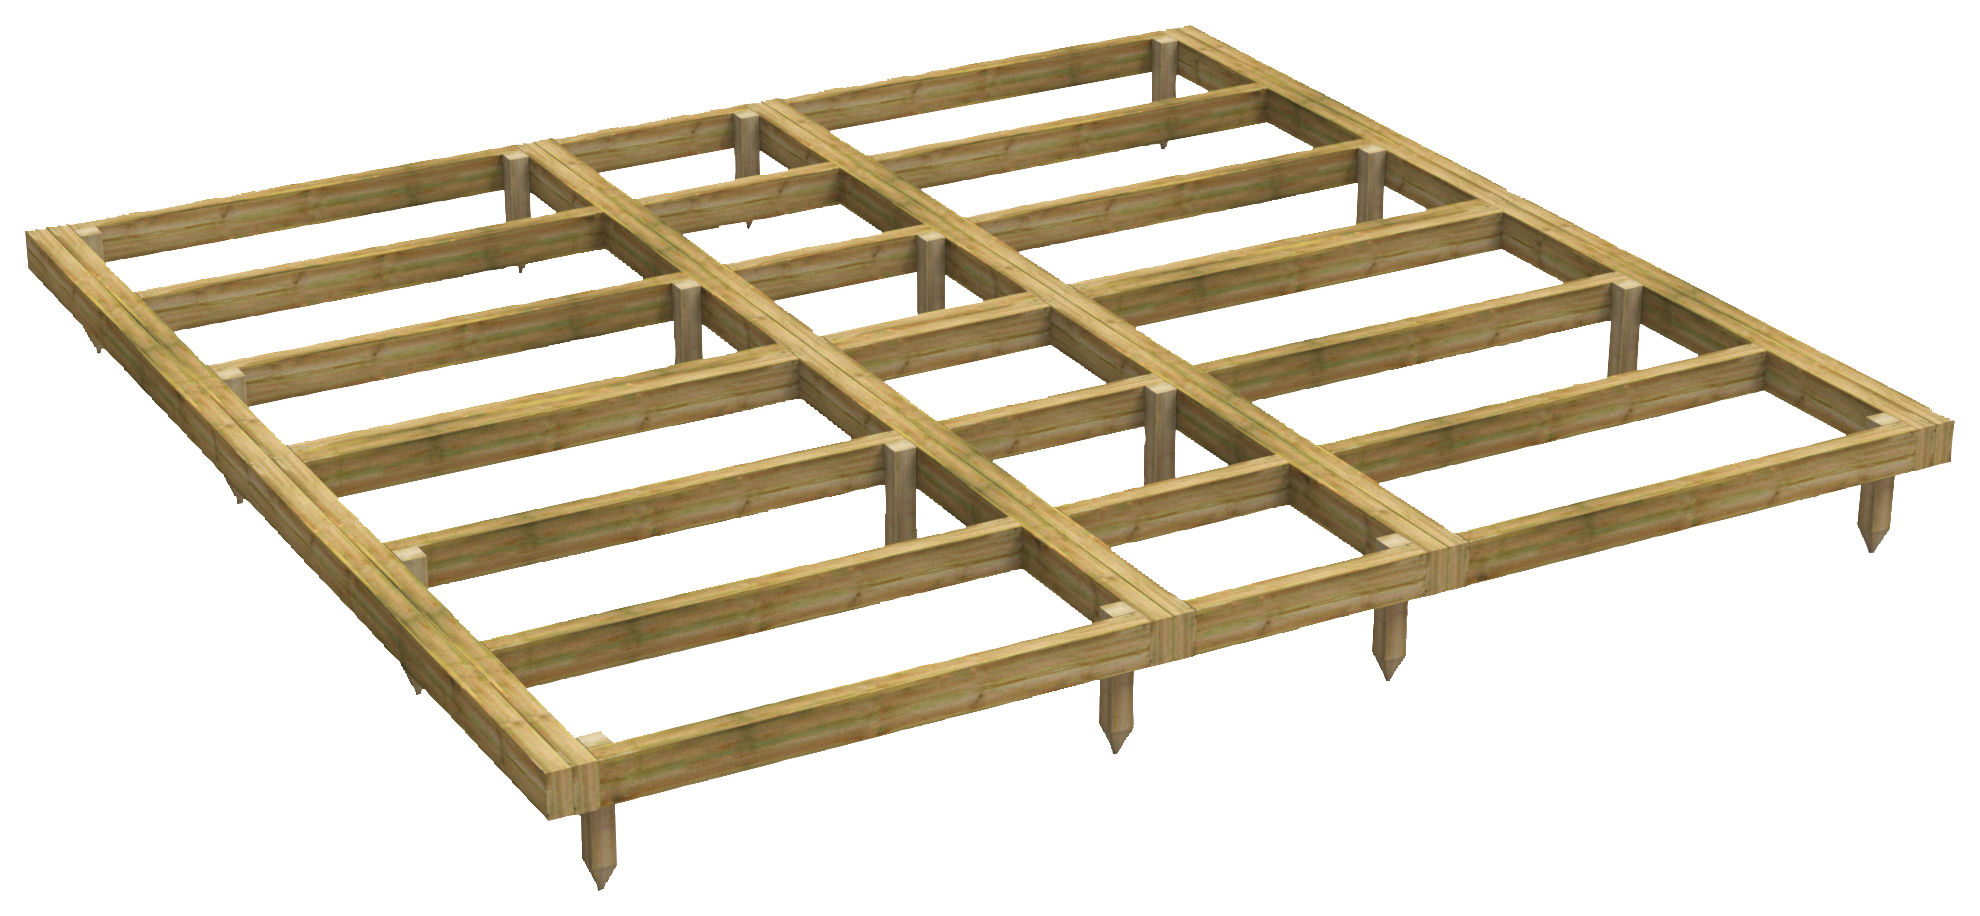 Image of Power Sheds 10 x 10ft Pressure Treated Garden Building Base Kit